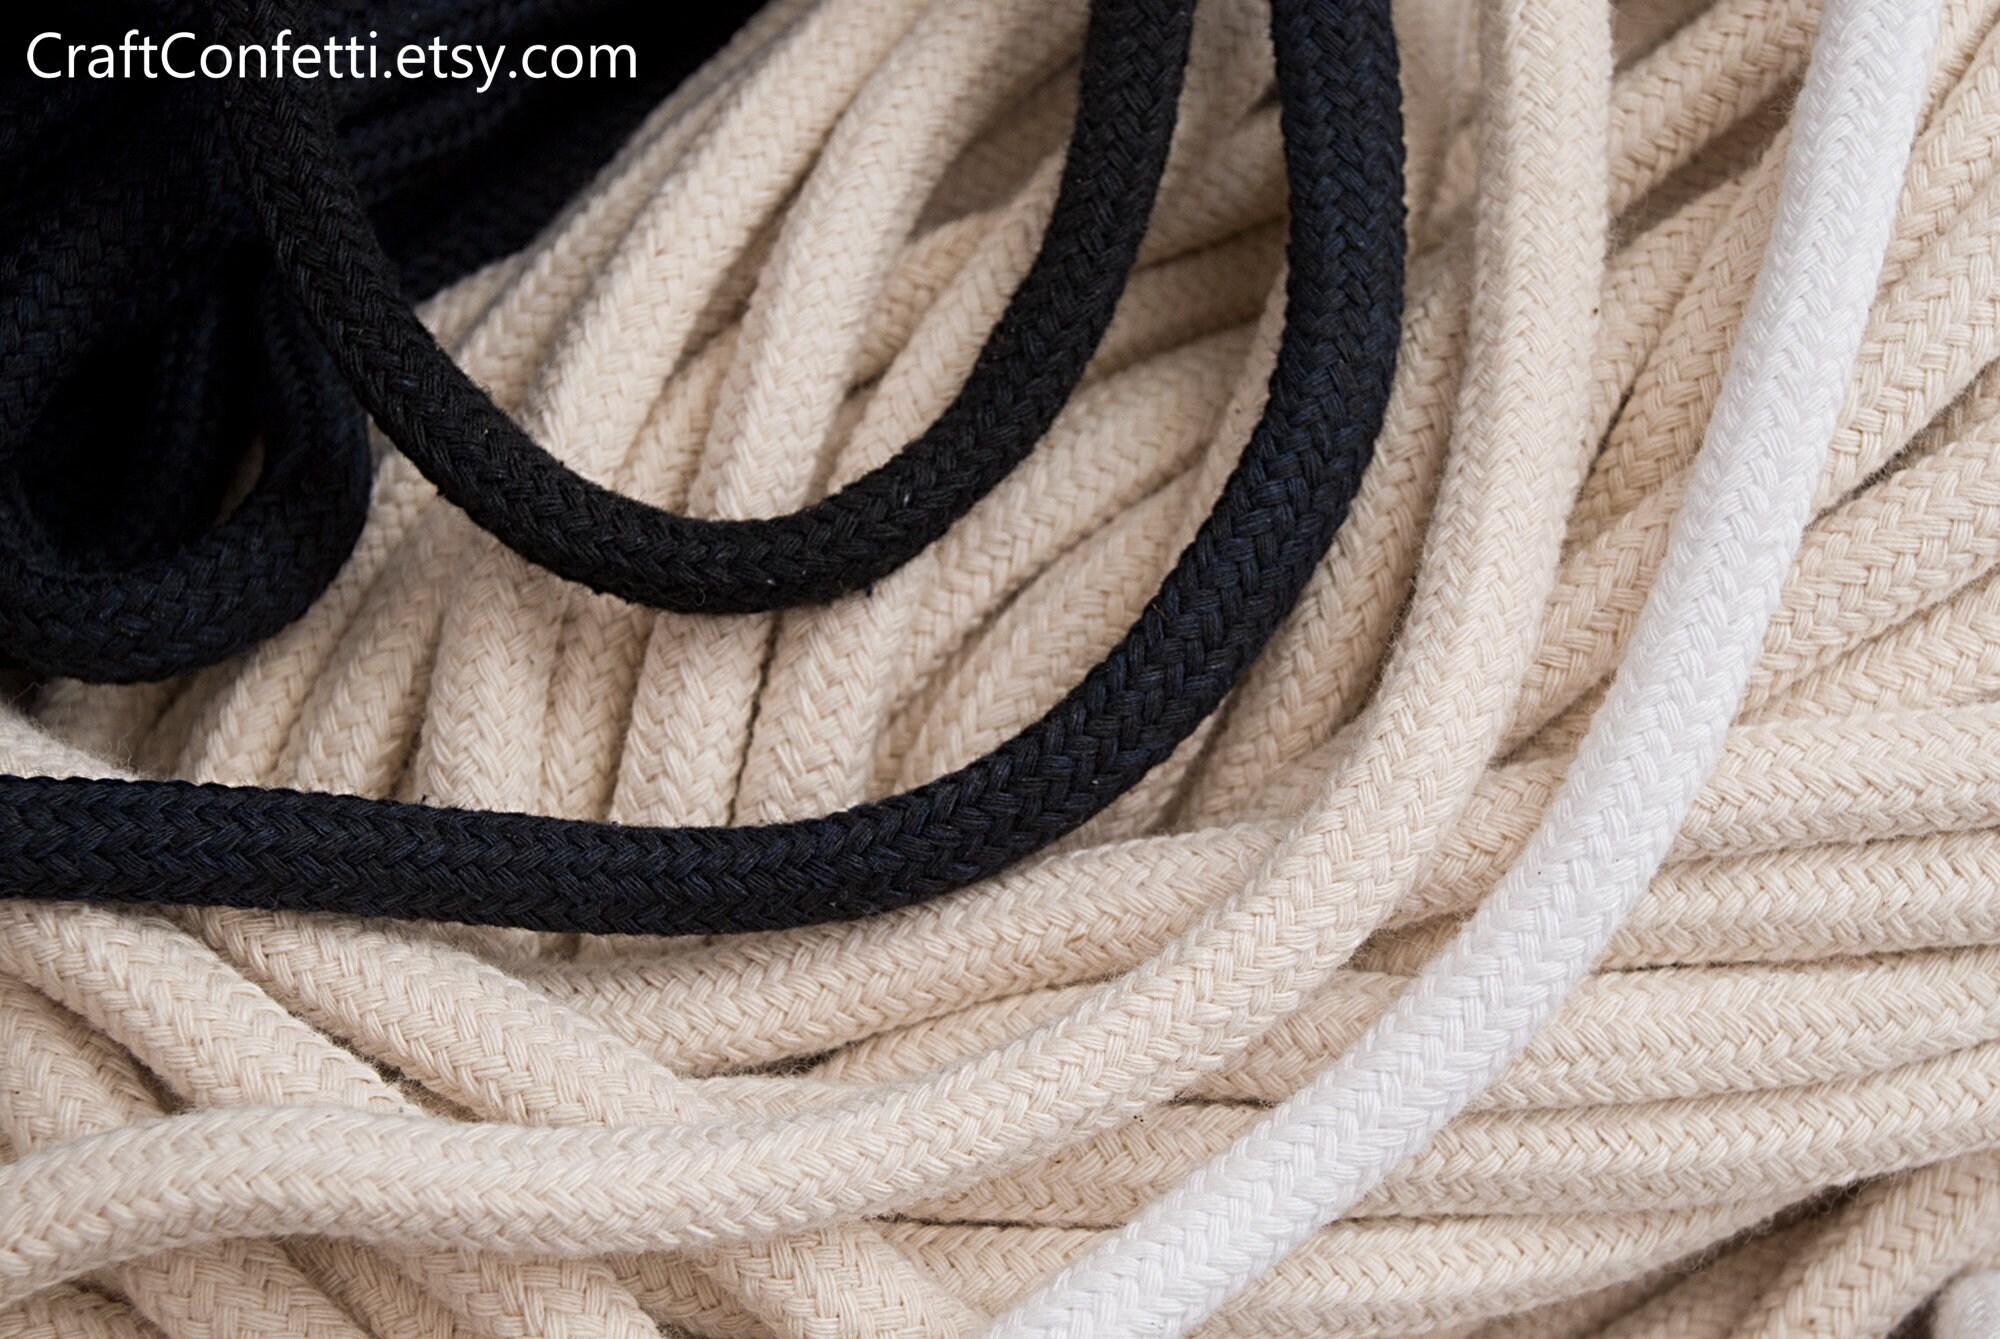 5 Meters/lot Beige Cotton Rope 4-20mm Thick Cotton Cords For Bag Strap Home  Decor Accessories Diy Handmade Rope Craft - Cords - AliExpress